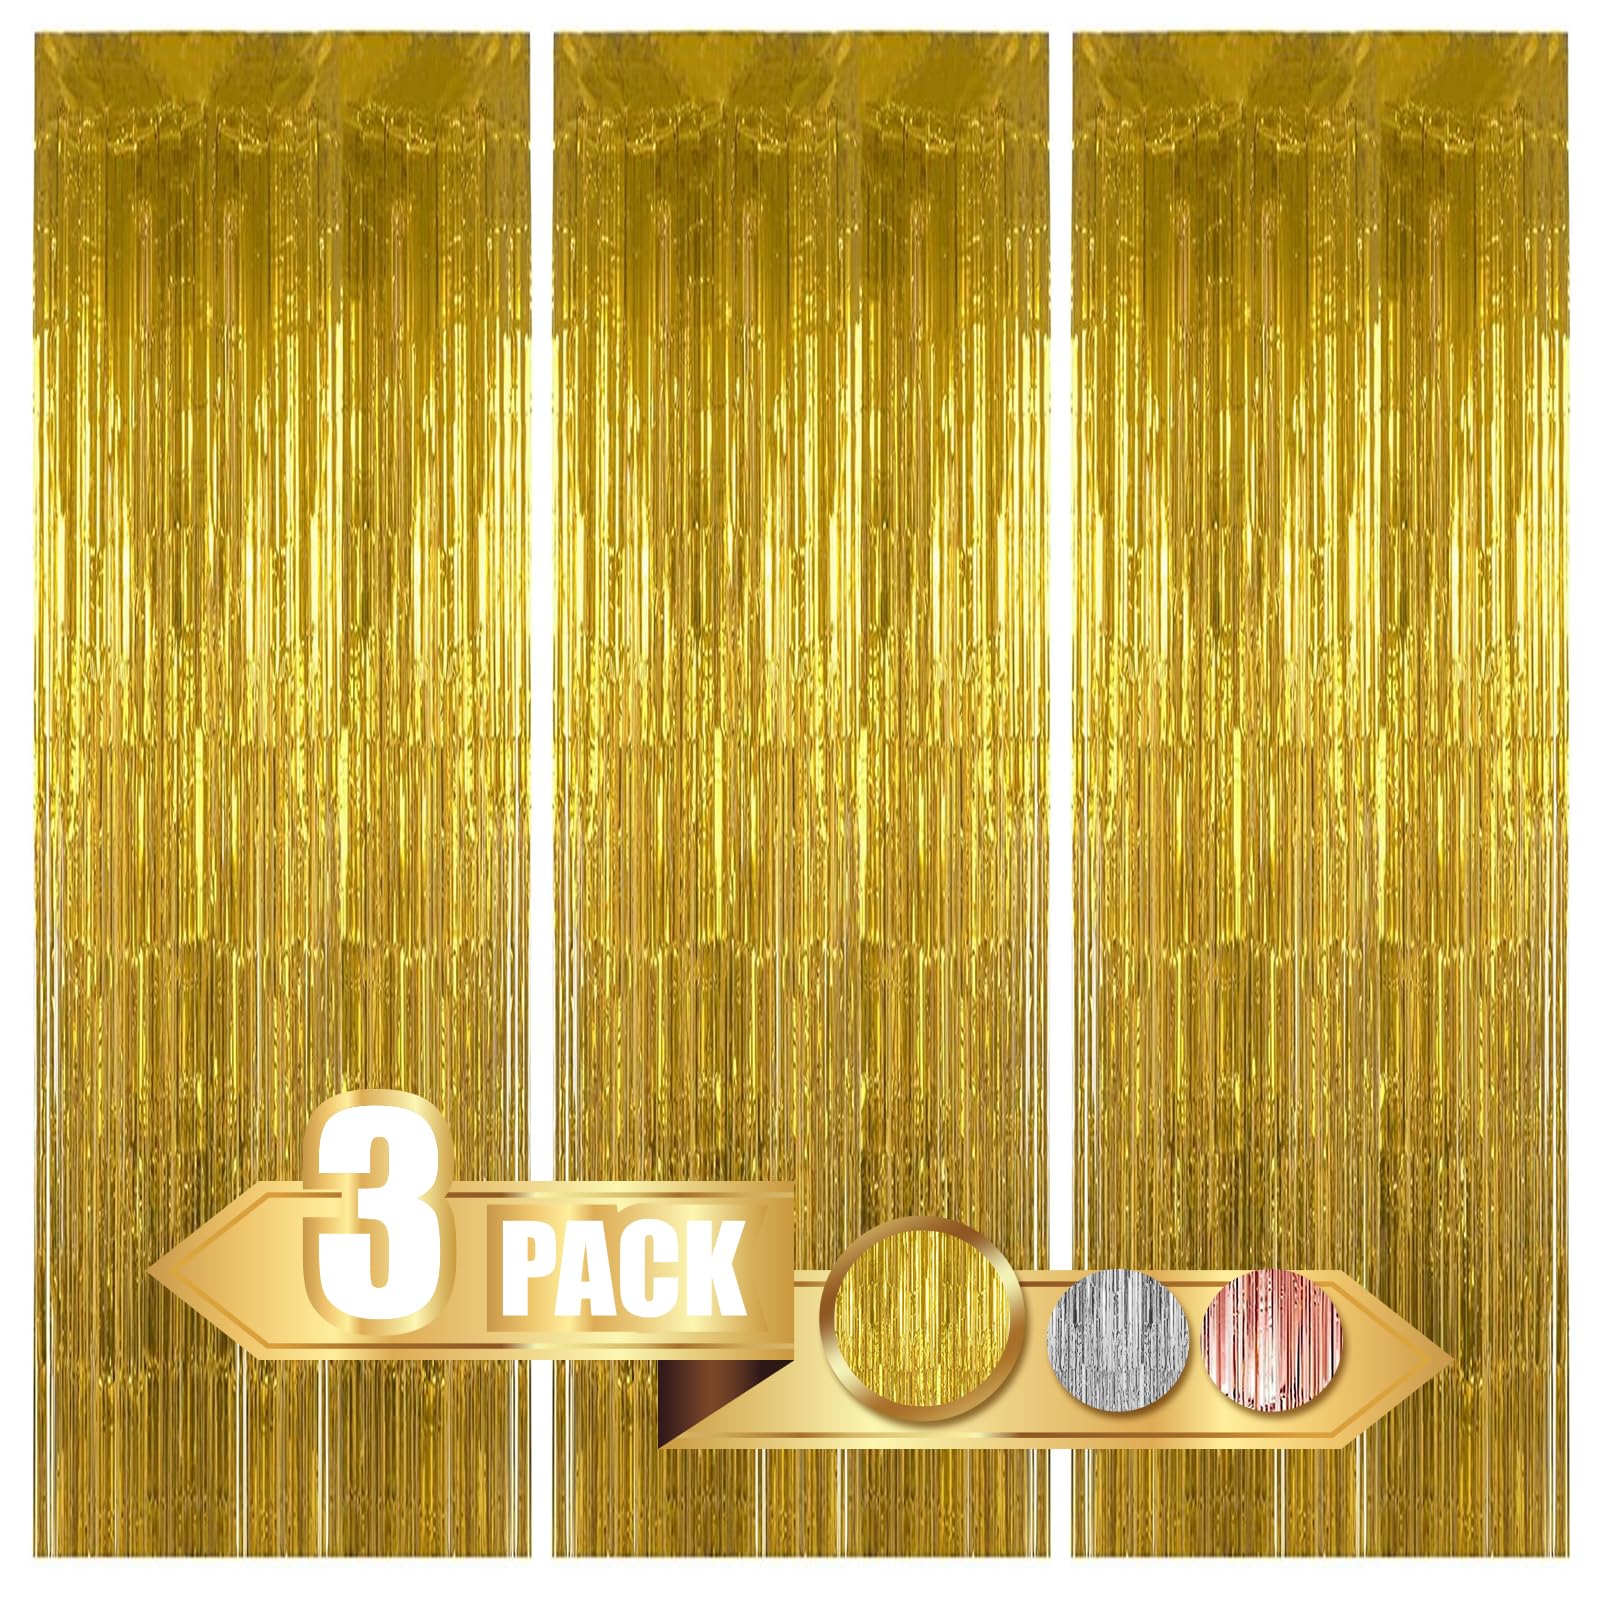 Black and Gold Foil Fringe Curtain,Tinsel Metallic Curtains Photo Backdrop  Streamer Curtain for New Year Birthday Party Supplies